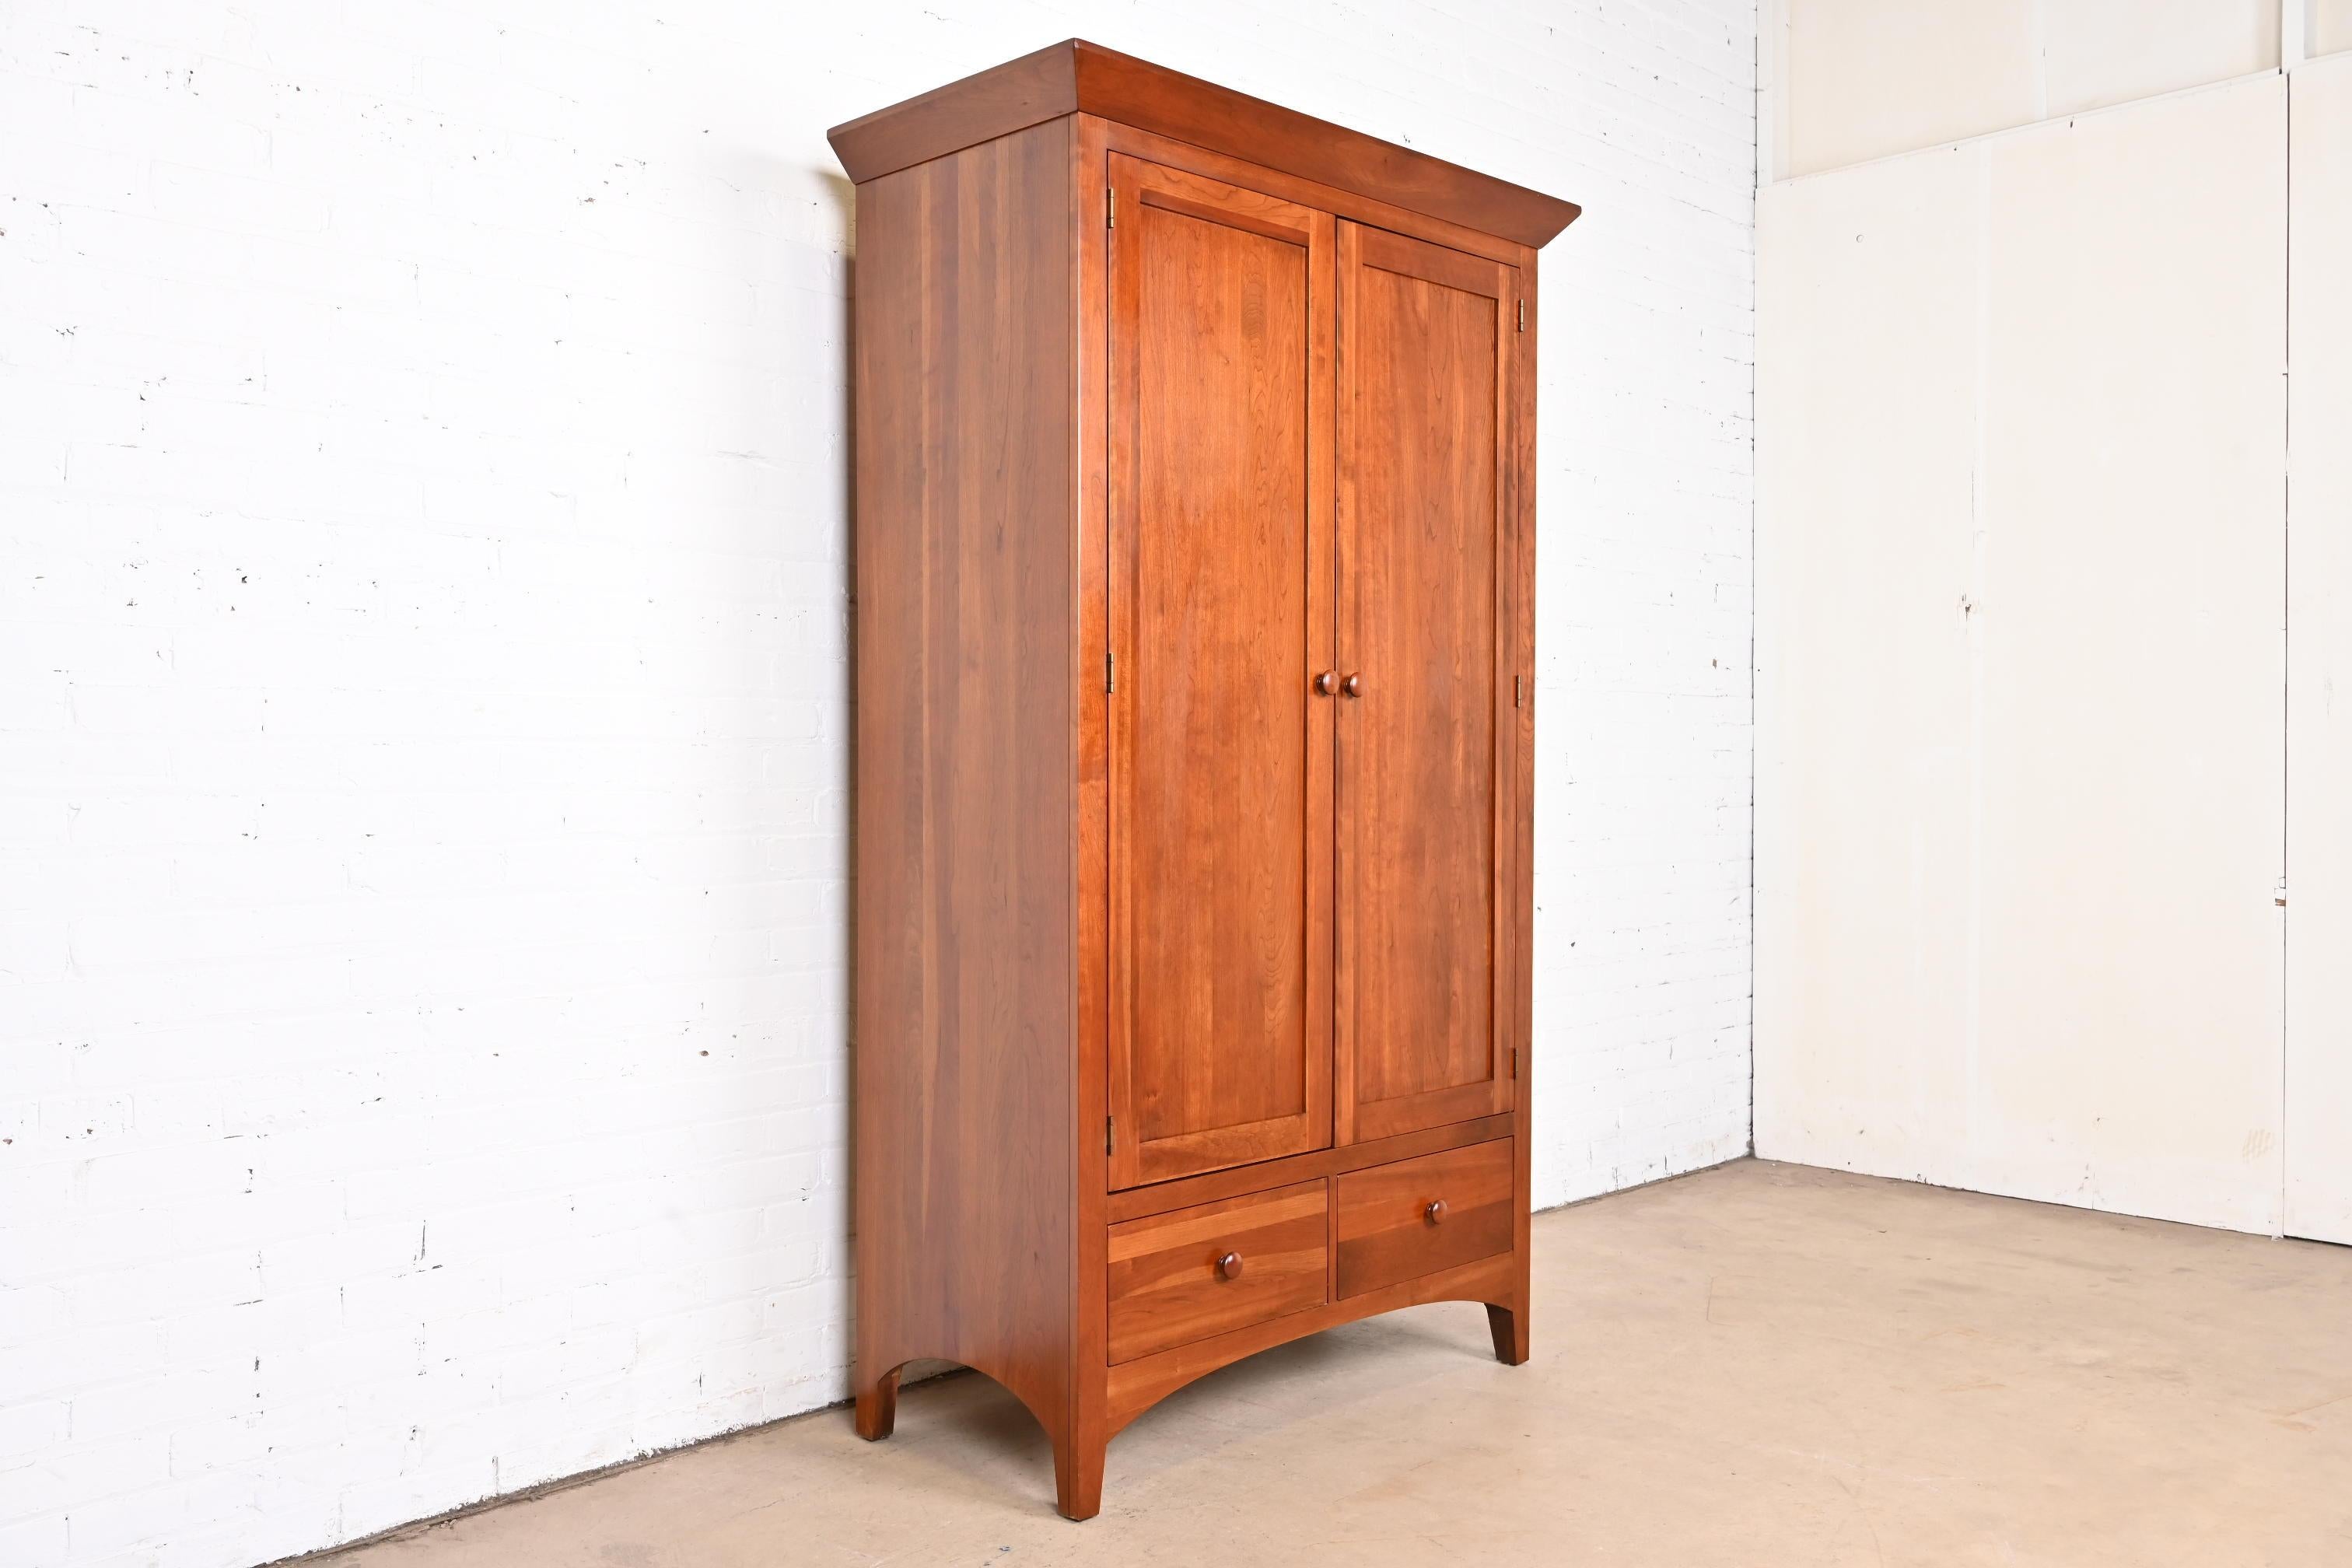 Arts and Crafts Arts & Crafts Solid Cherry Wood Armoire Dresser